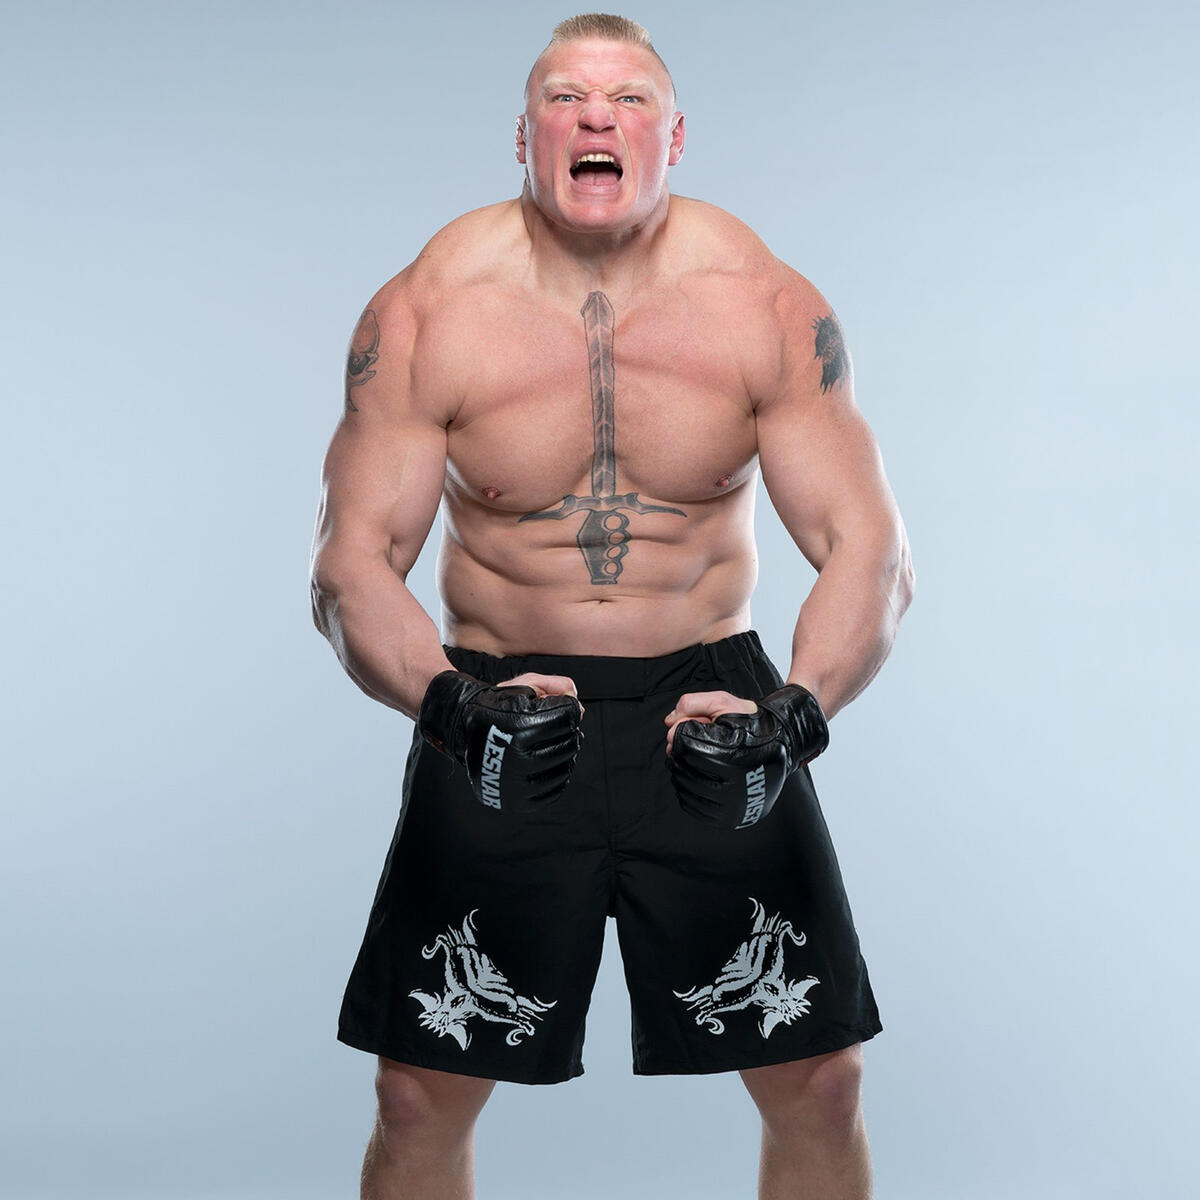 Universal Champion Brock Lesnar's first WWE photo shoot in more than